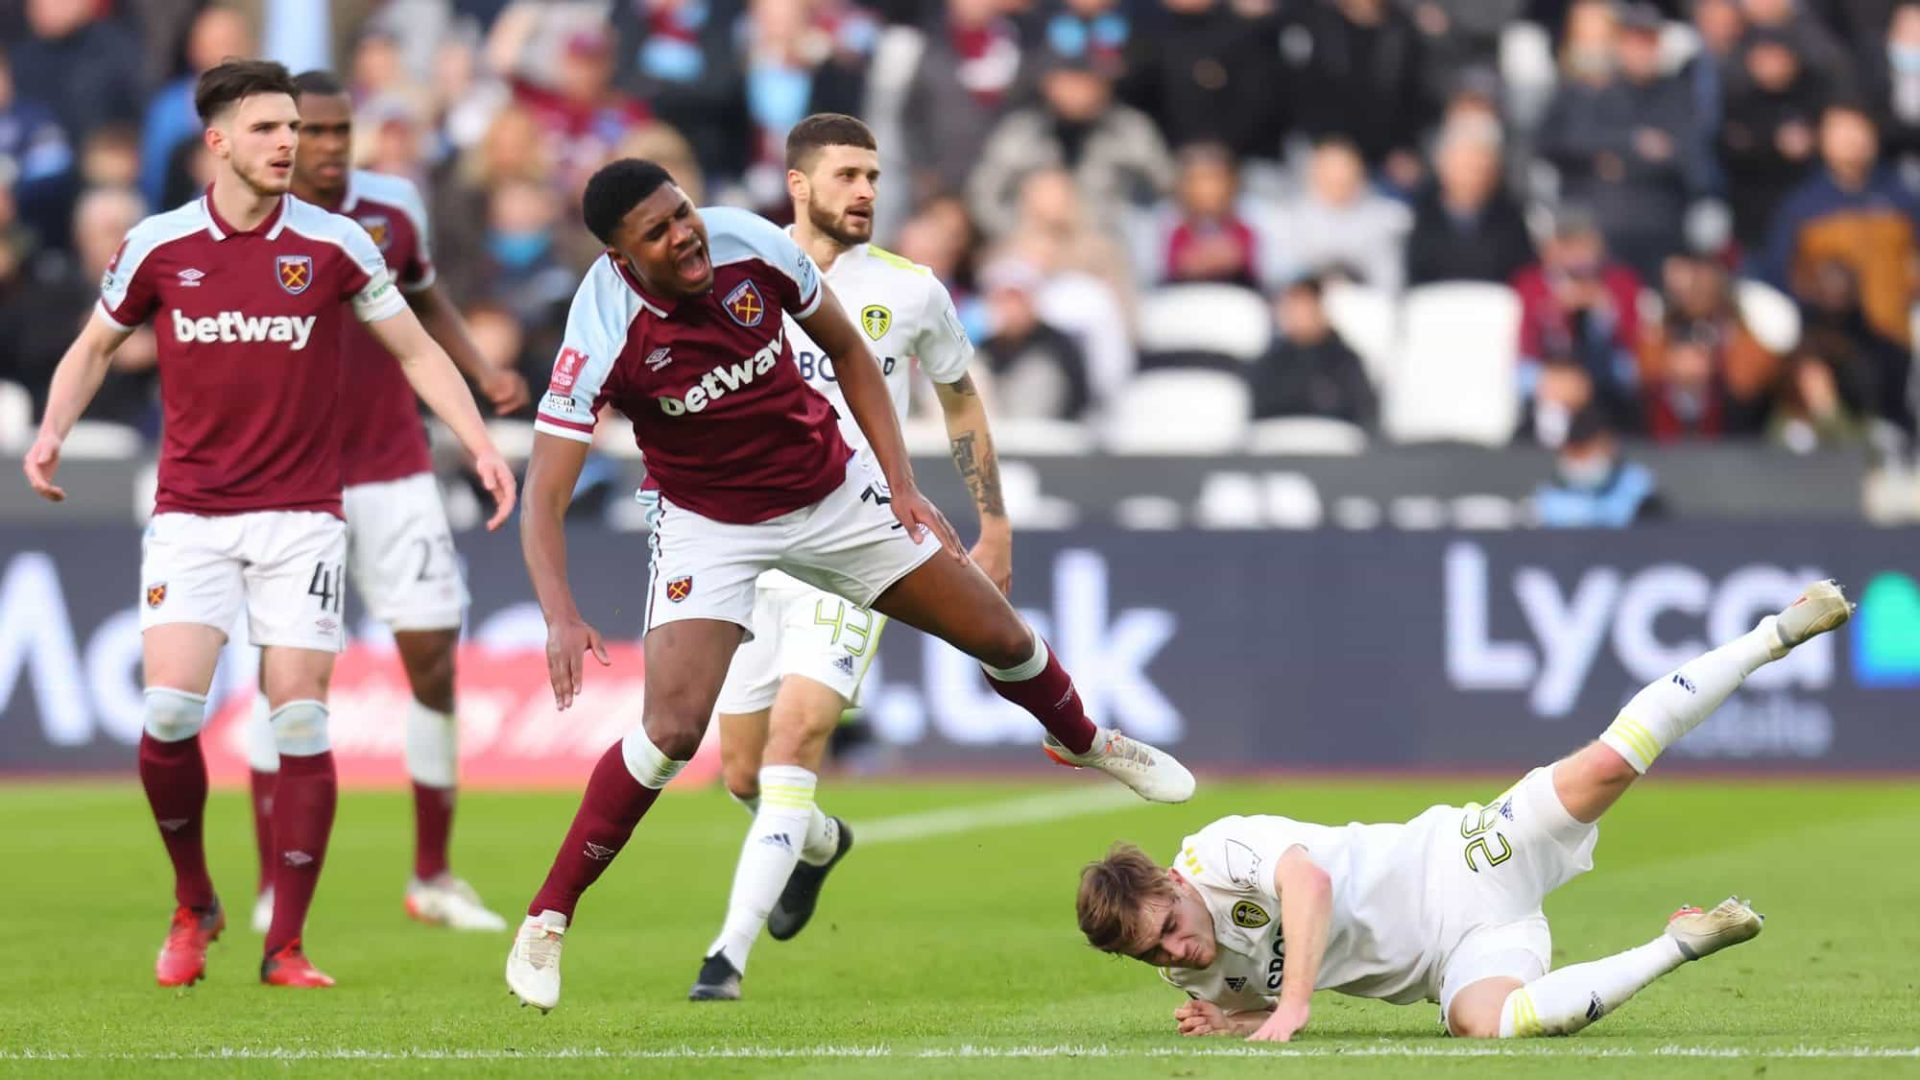 Lewis Bate makes a tackle at West Ham (in the first half, for any London journos wondering)